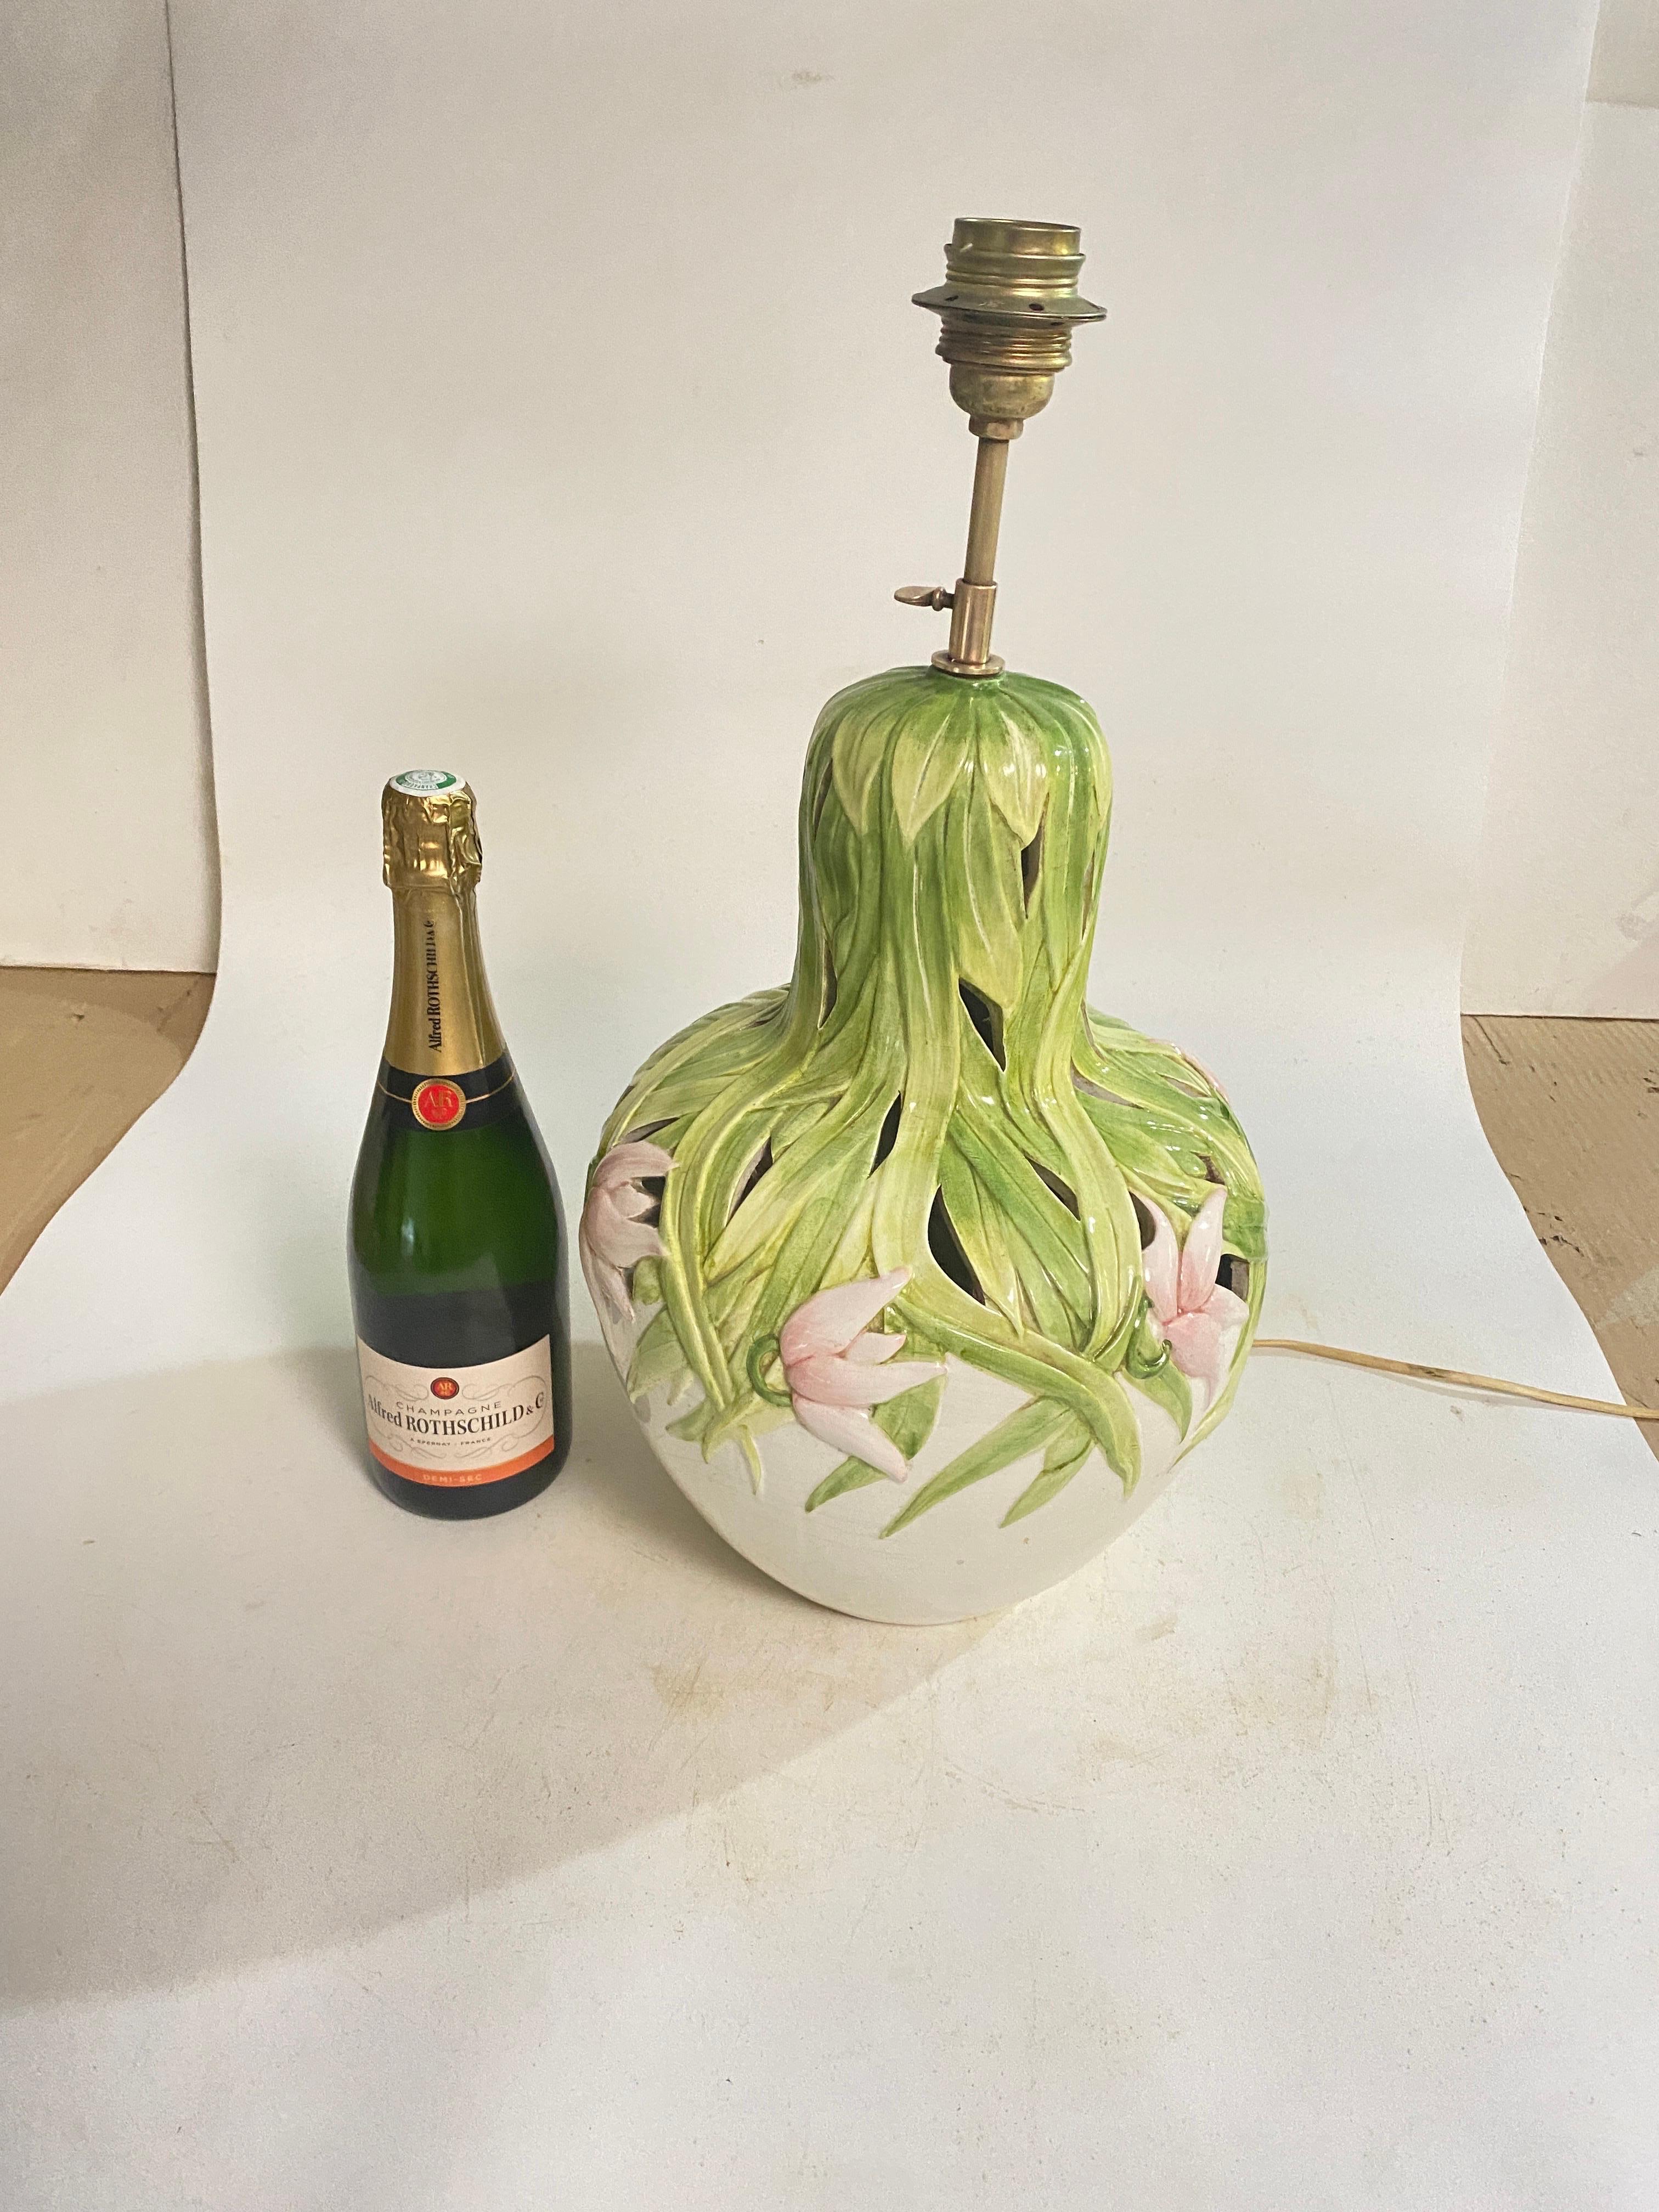 Table Lamp in Crakled Enemeled Ceramic Green Pink and White colors, France, 1970 For Sale 8